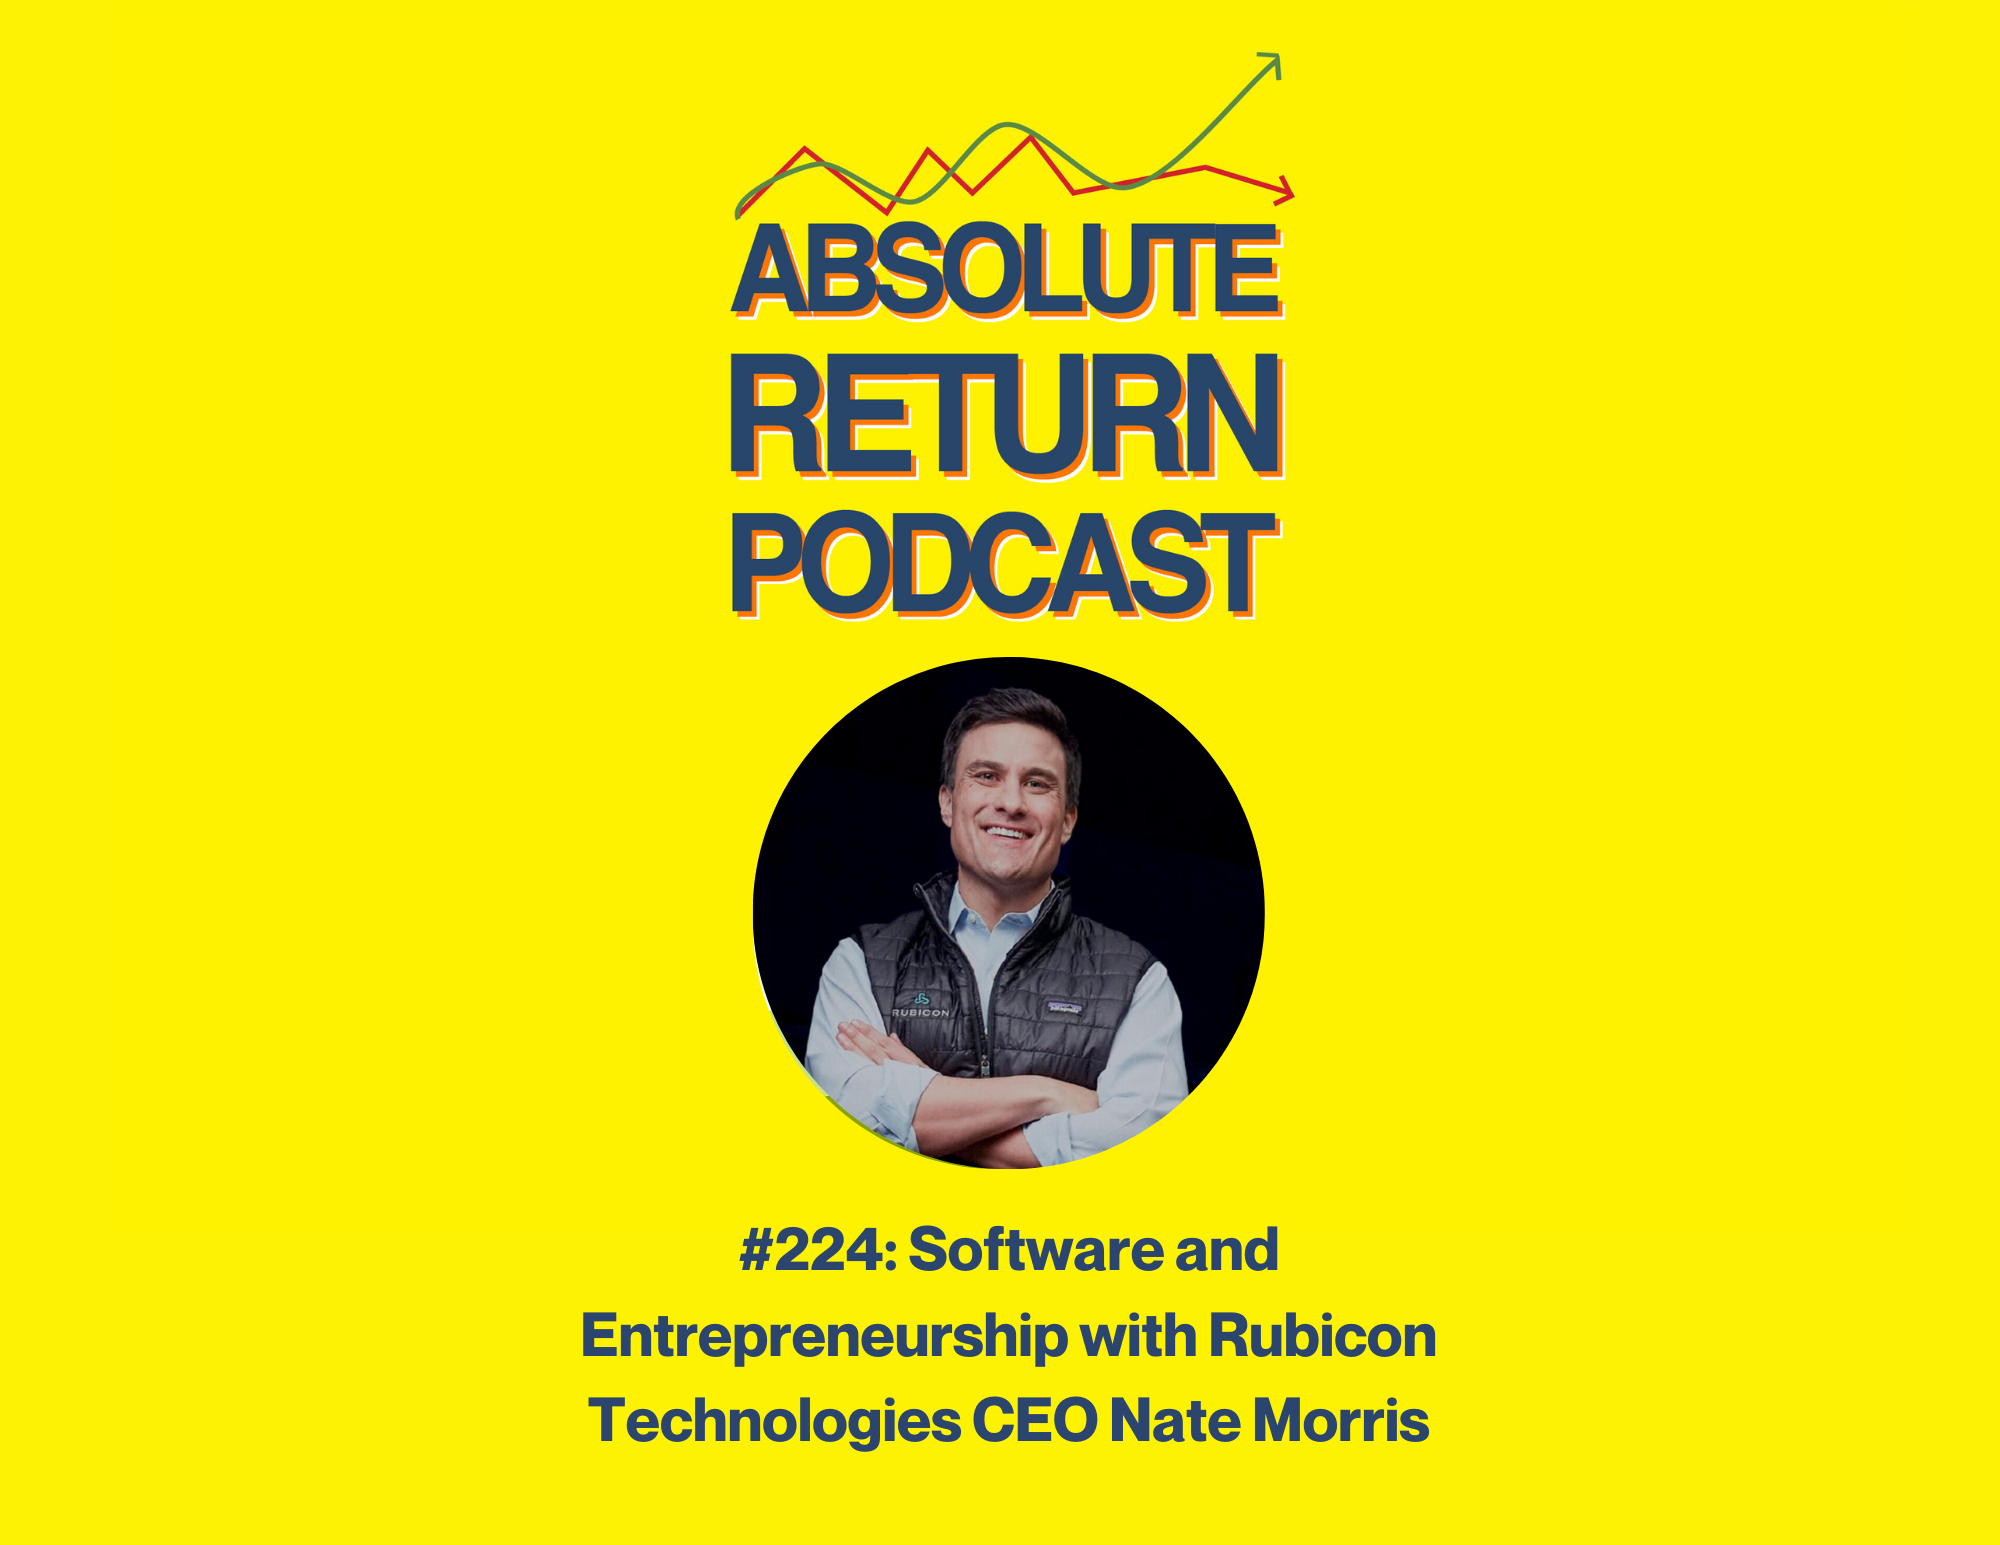 Absolute Return Podcast #224: Software and Entrepreneurship with Rubicon Technologies CEO Nate Morris